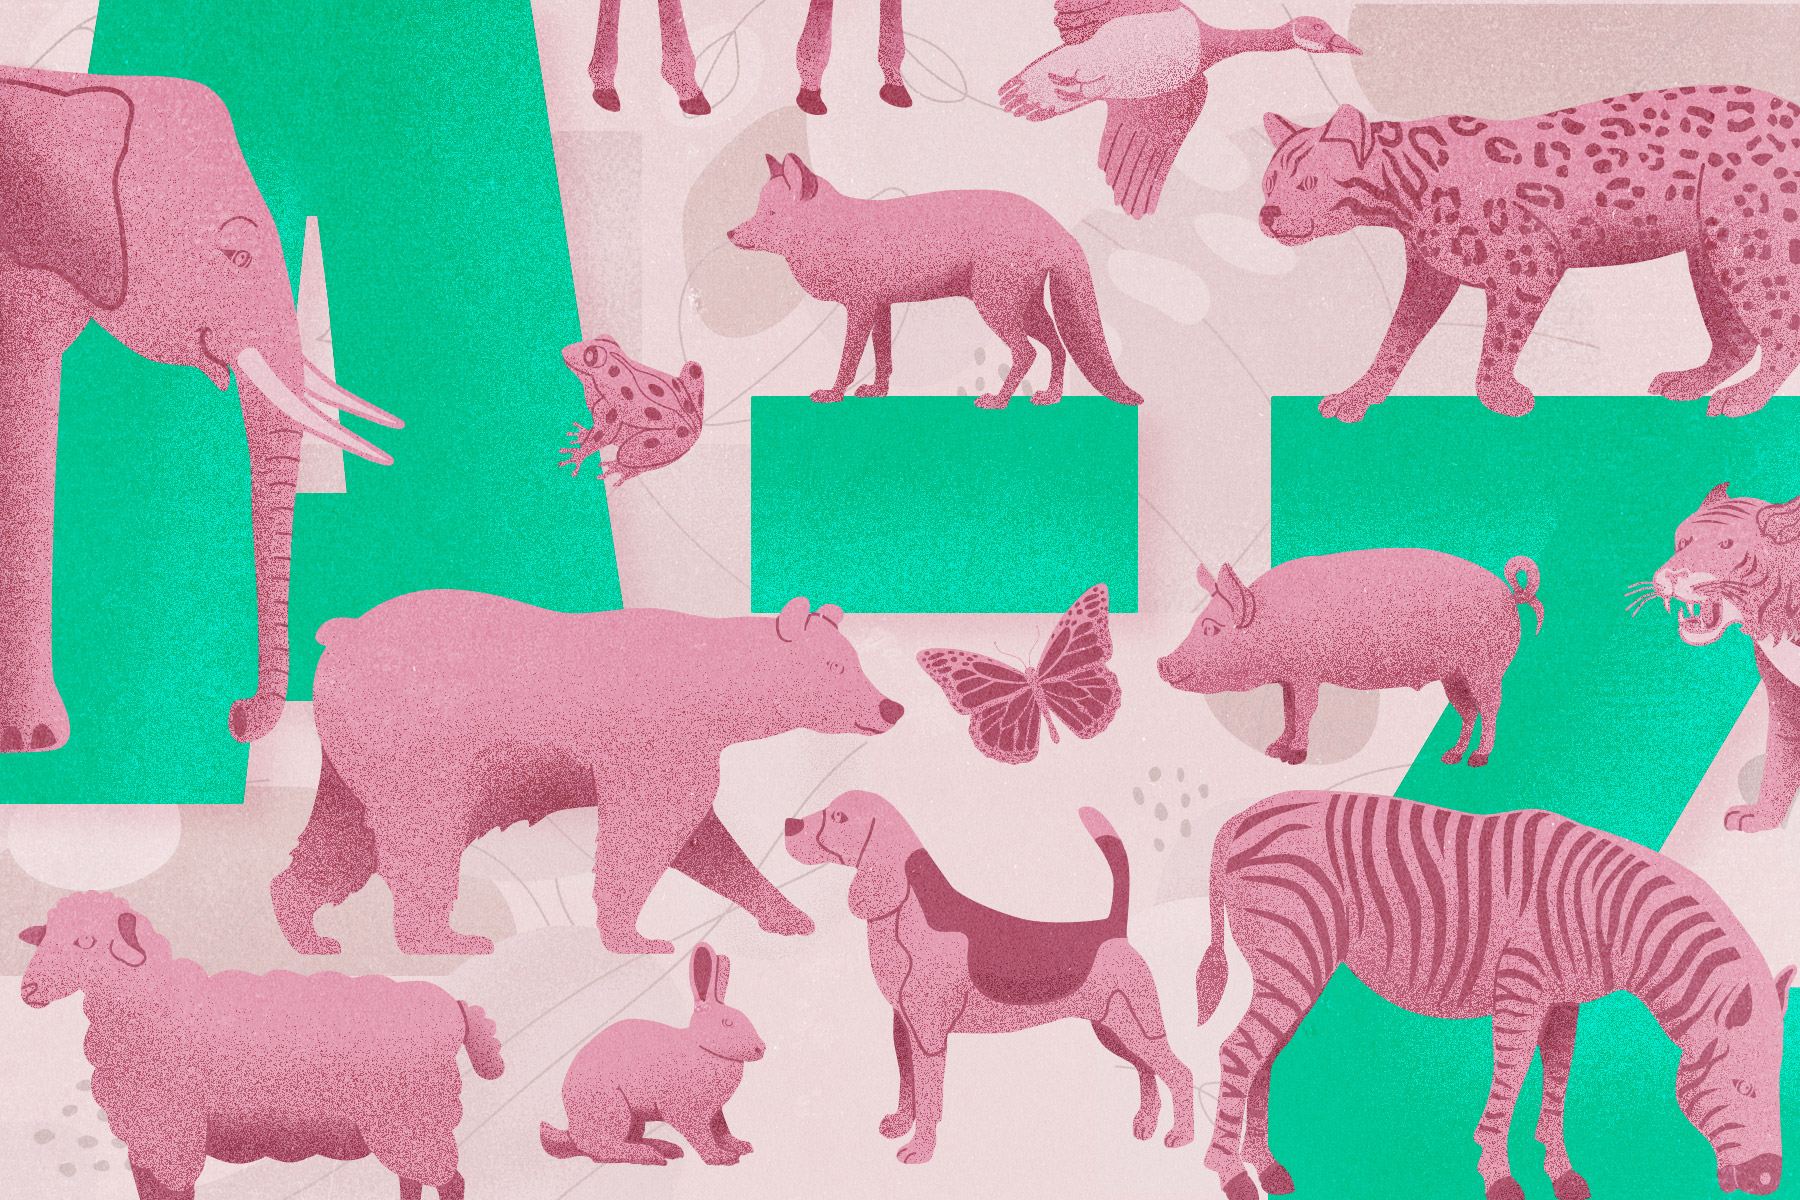 An illustration of pink animals against a lighter pink background and green 'A' and 'Z' letters